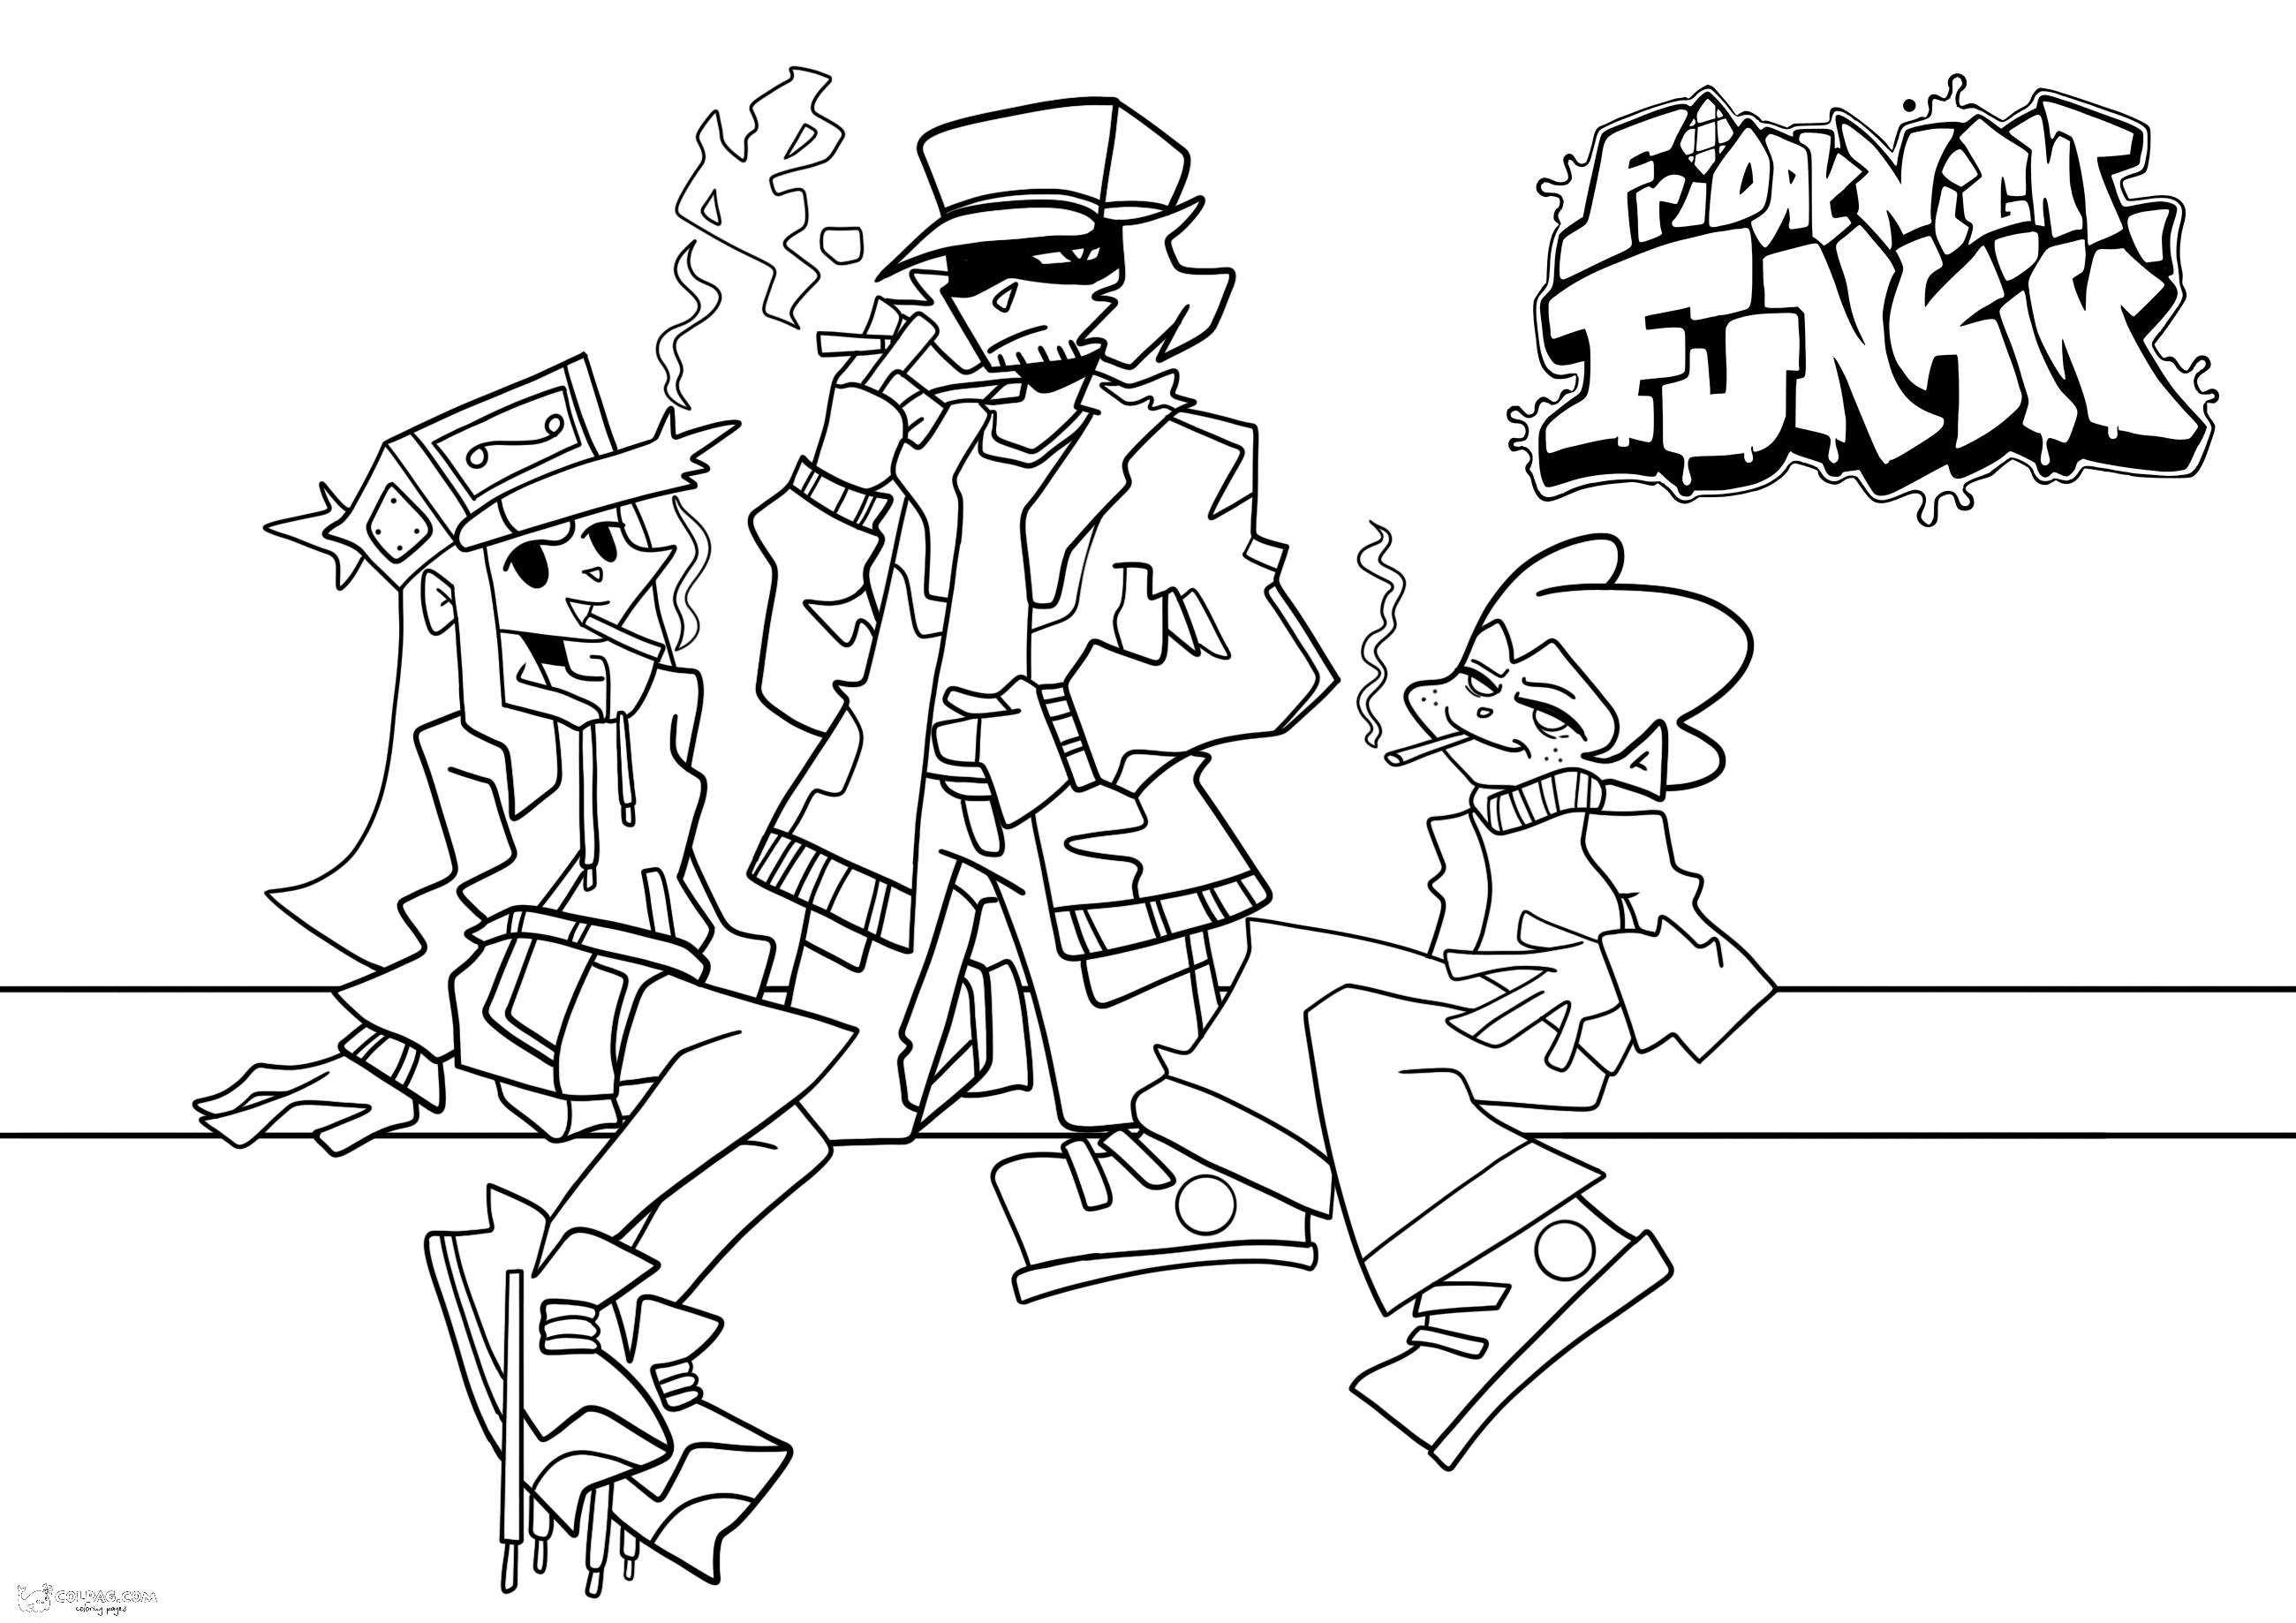 Coloriages de Friday Night Funkin'